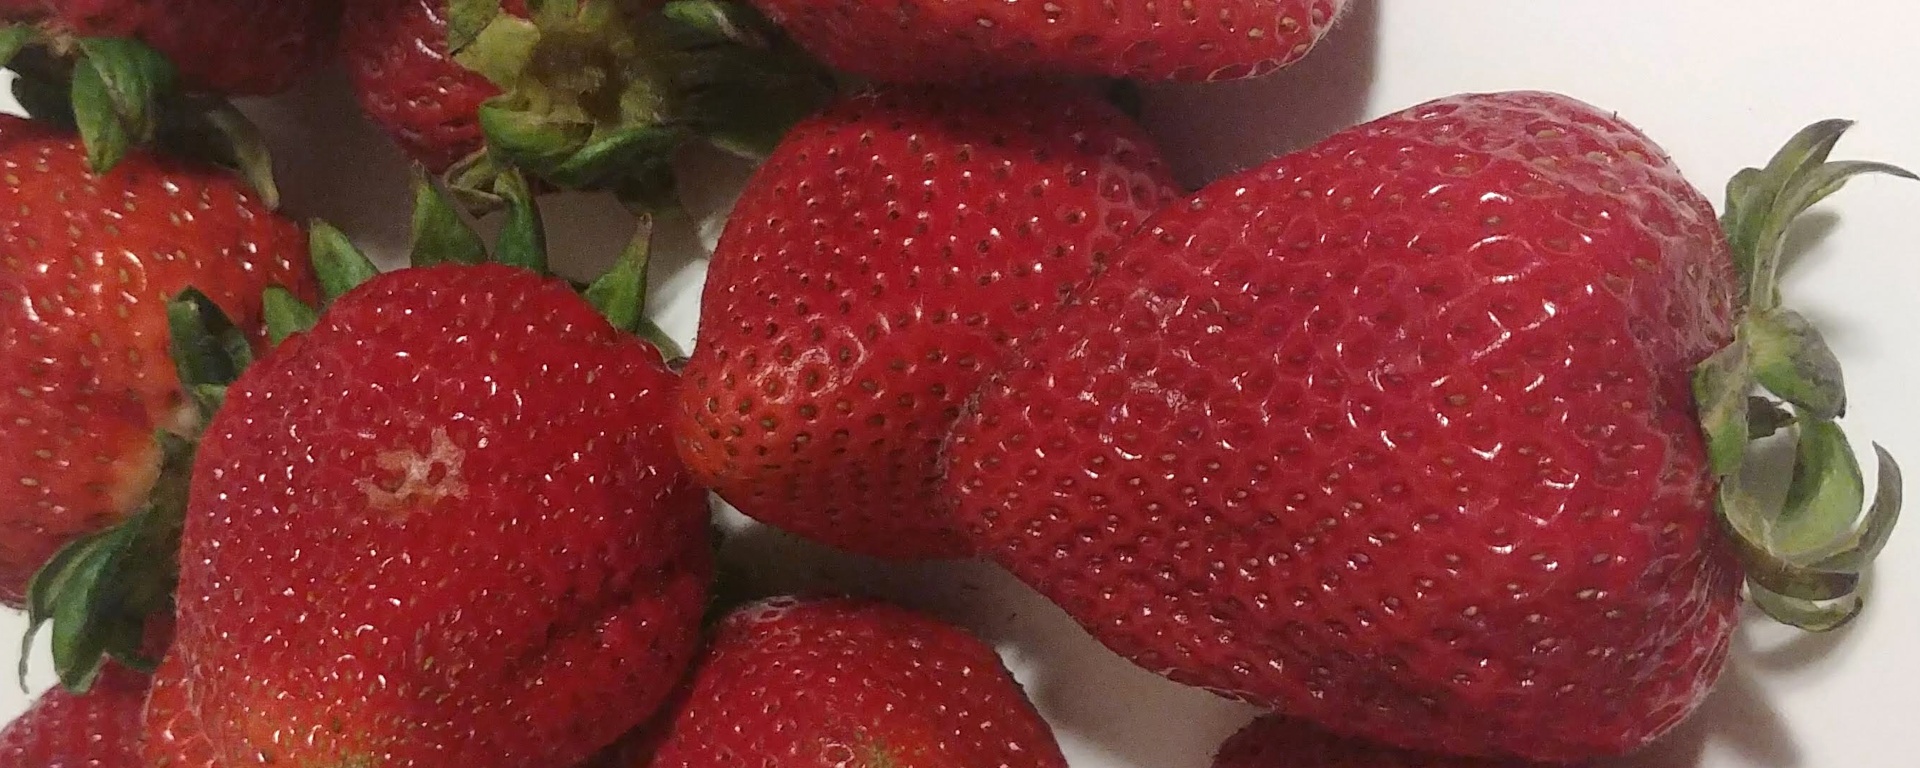 7 Reasons Strawberries Are Healthy For You